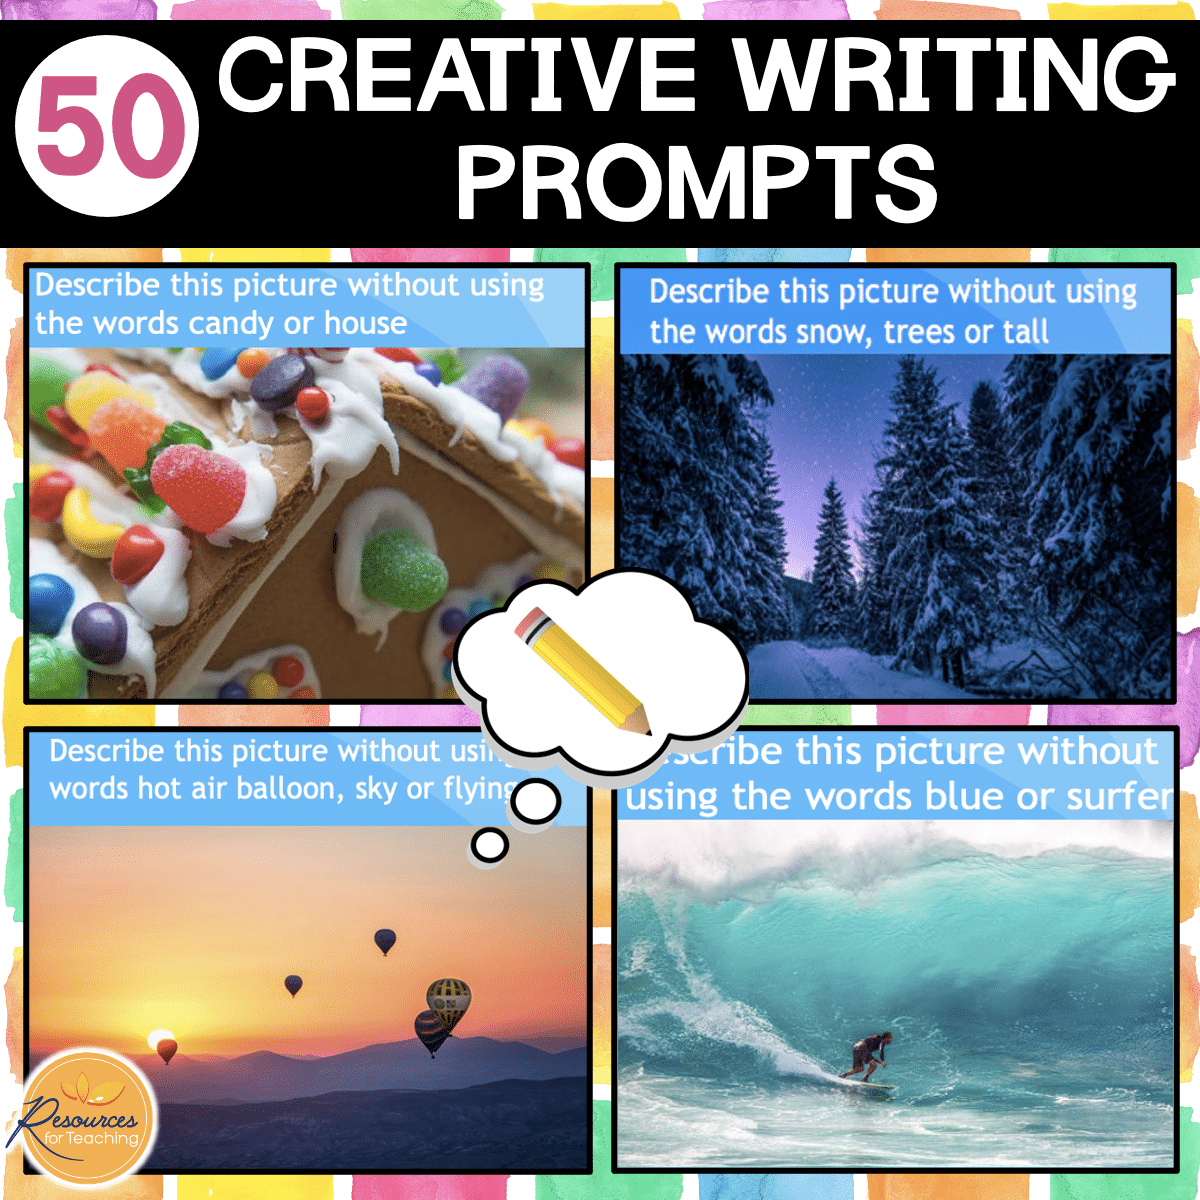 creative writing prompts examples